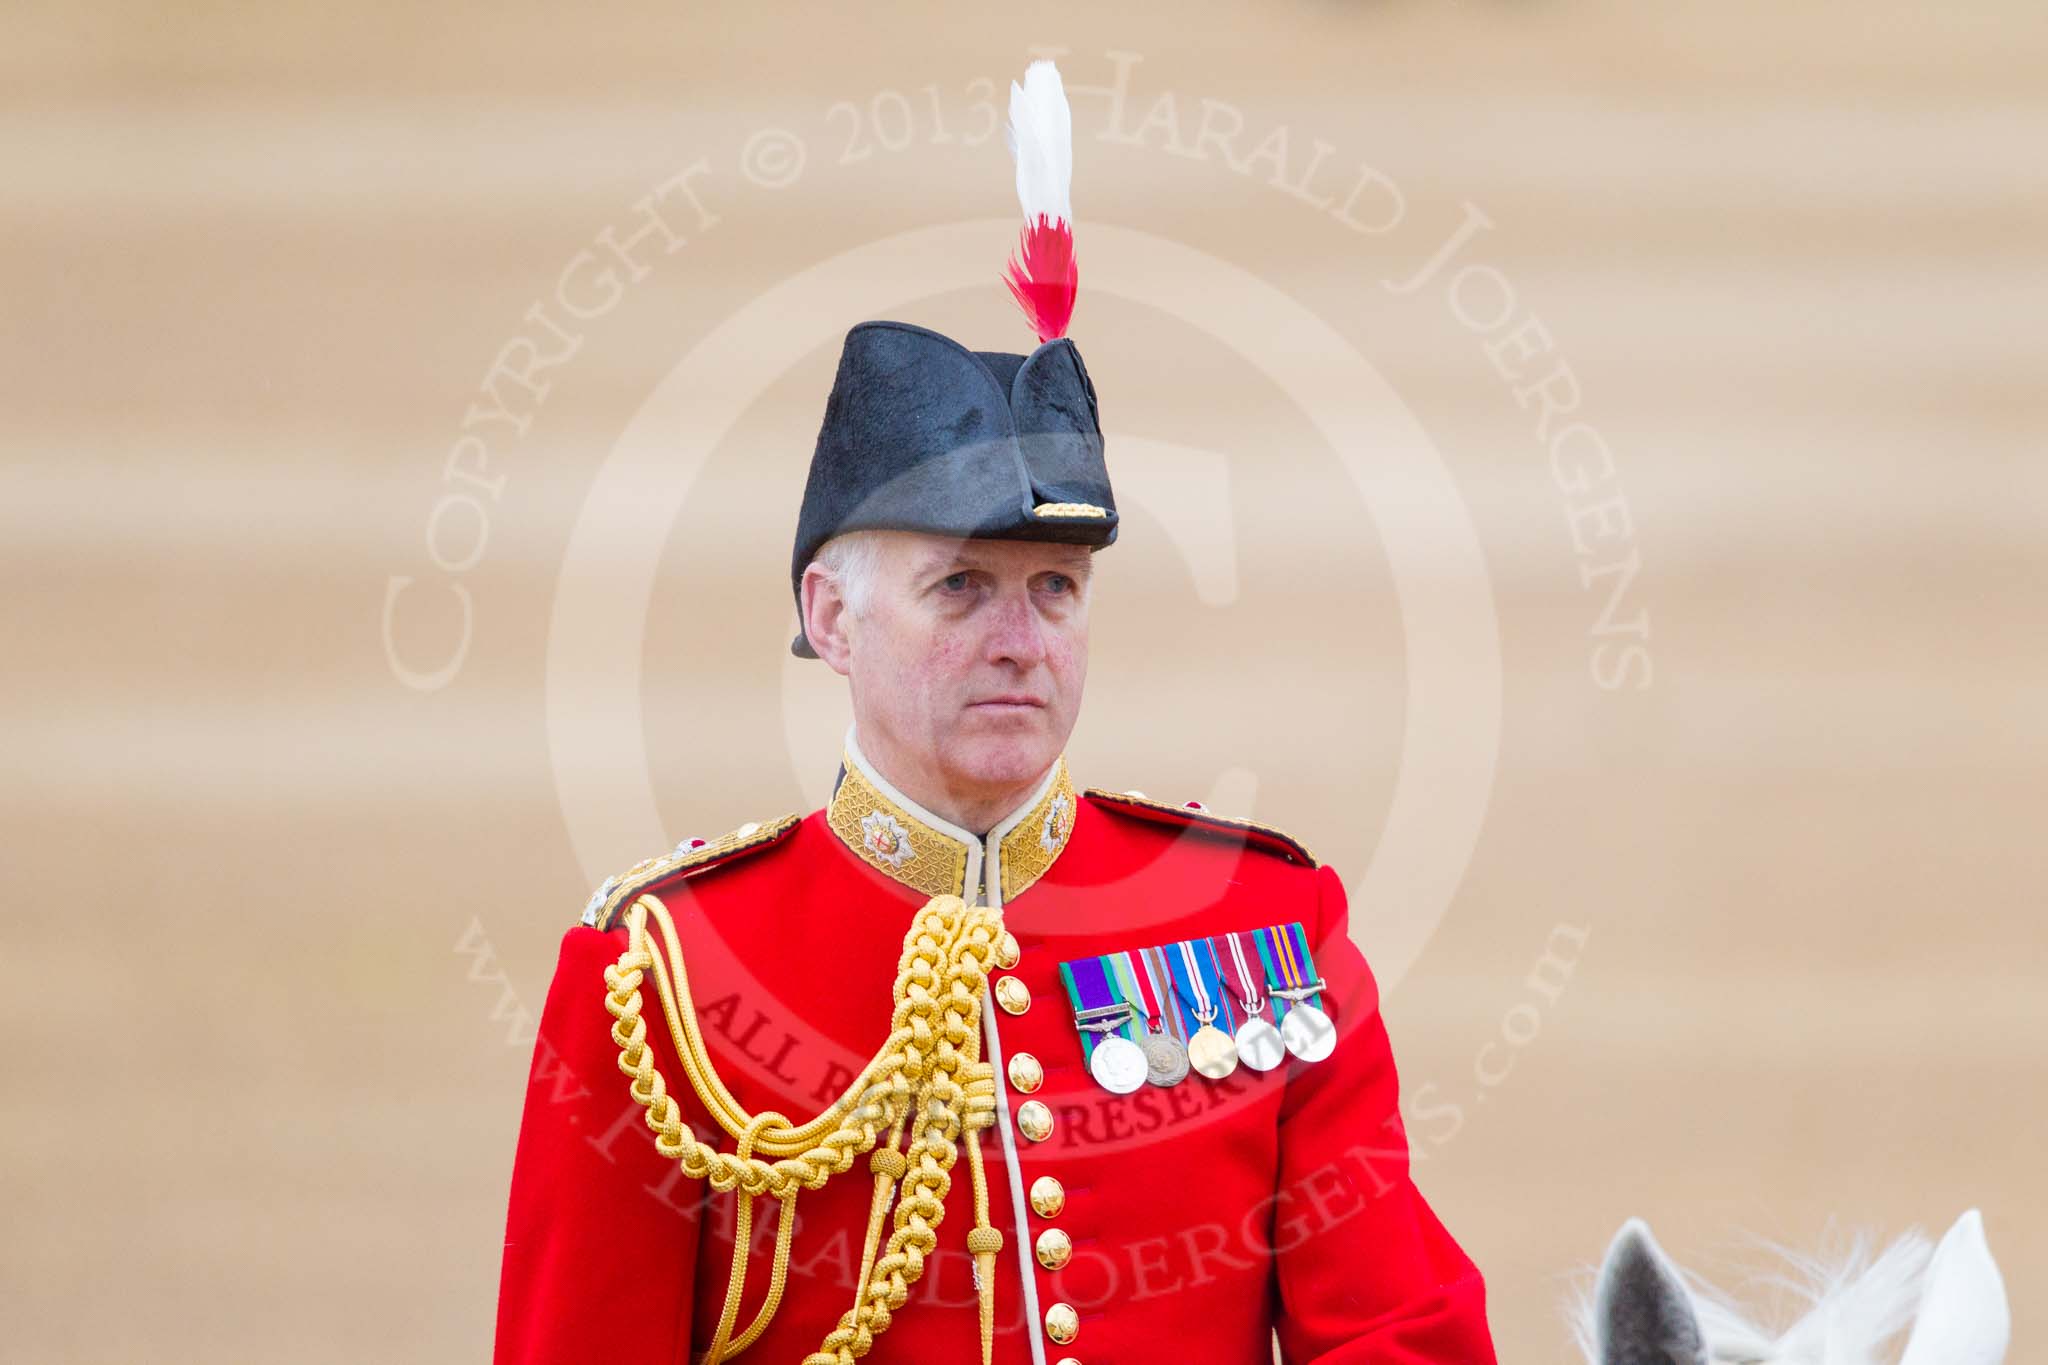 Trooping the Colour 2015. Image #315, 13 June 2015 11:05 Horse Guards Parade, London, UK